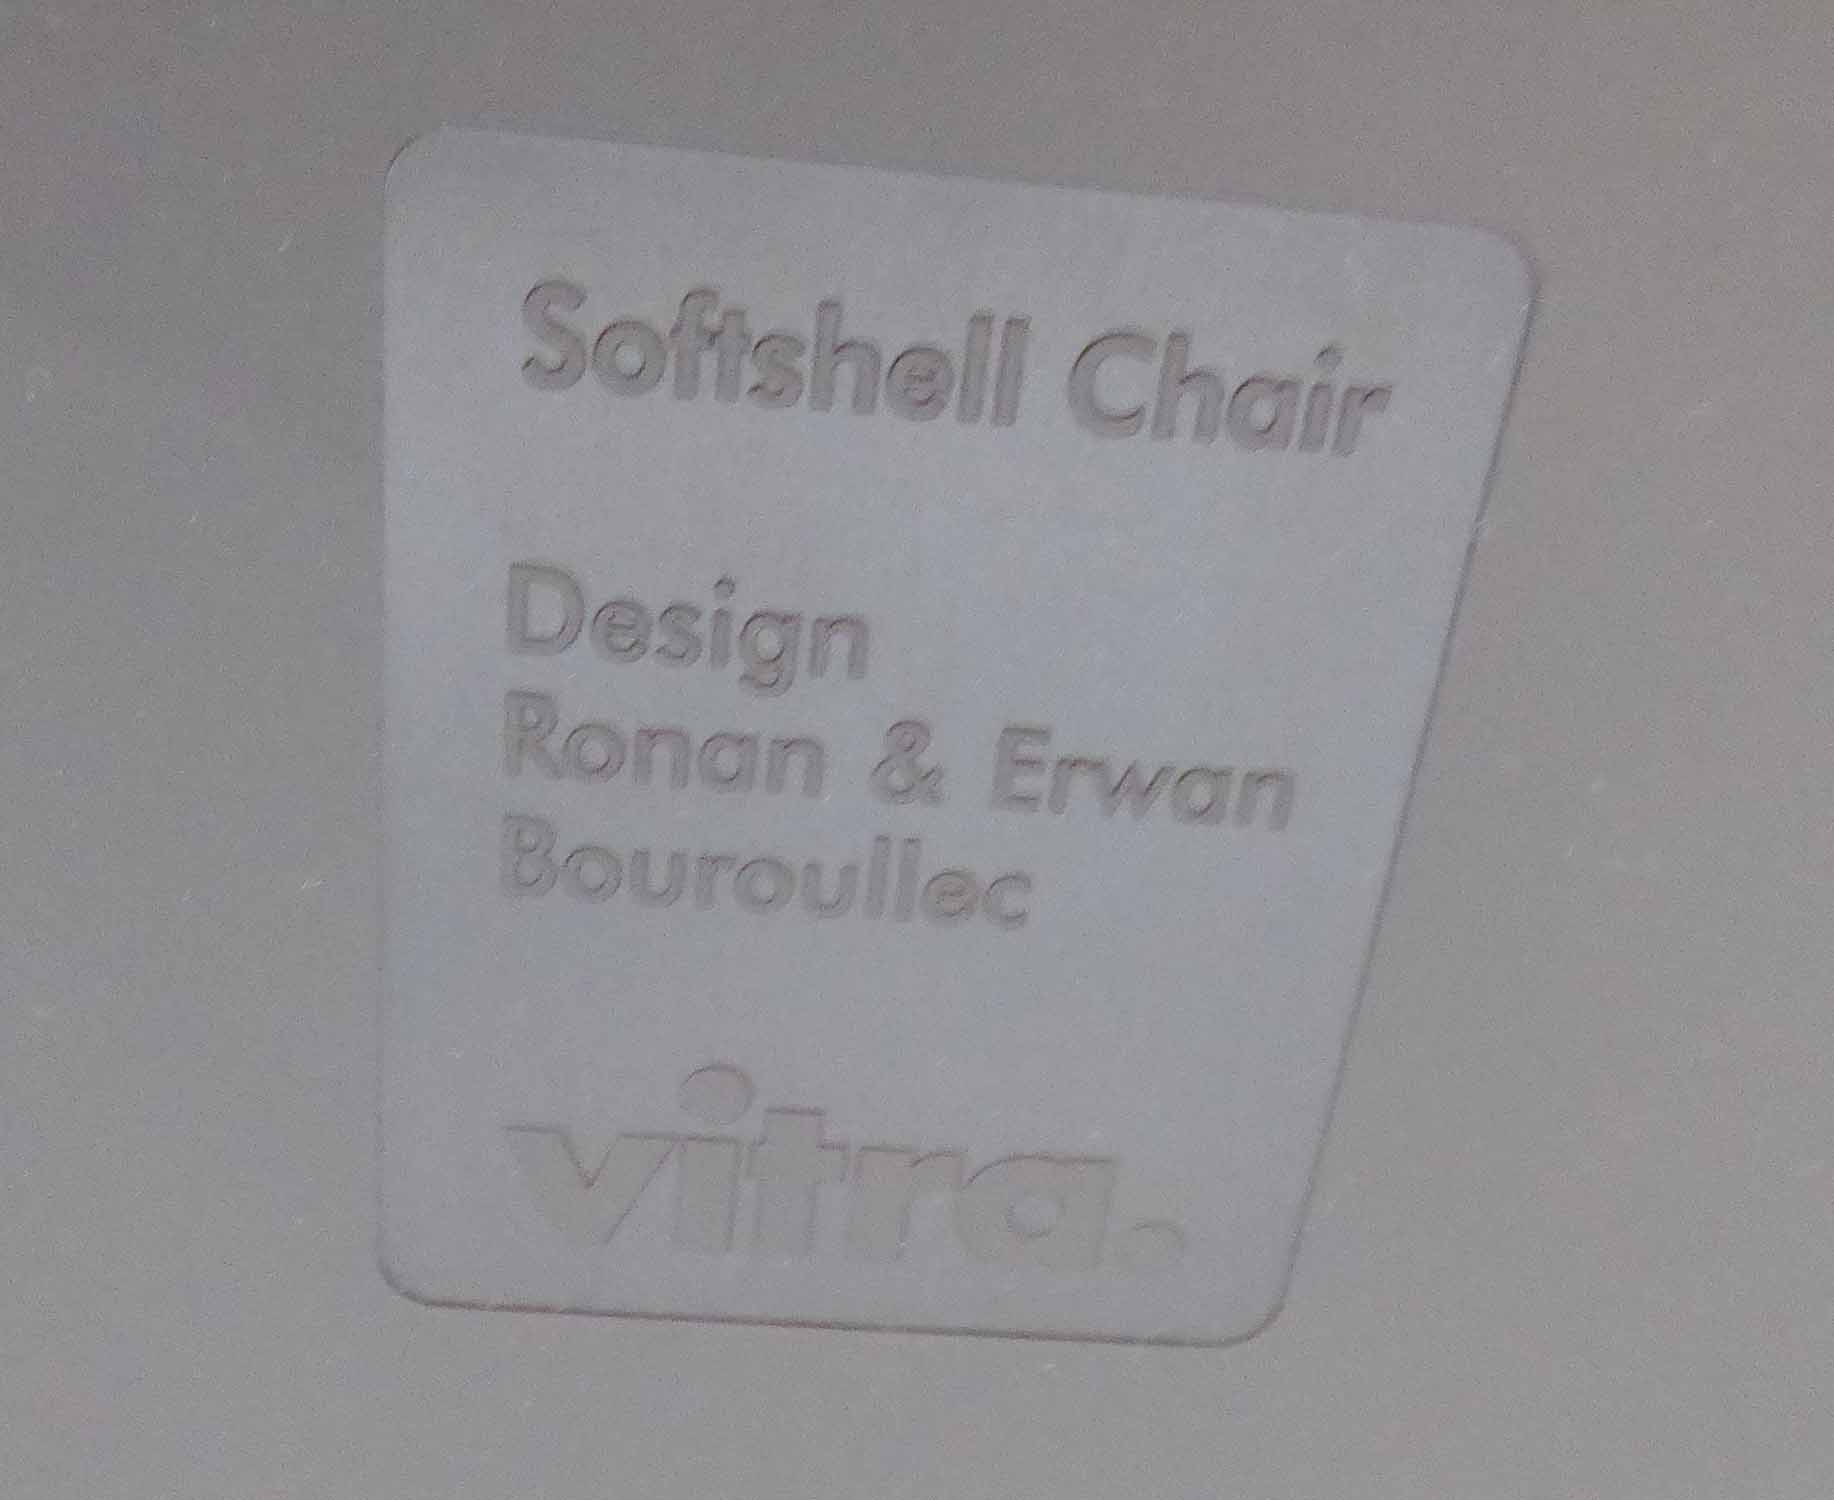 VITRA SOFT SHELL CHAIR, by Ronan & Erwan Bouroullel, 80cm H. - Image 2 of 2